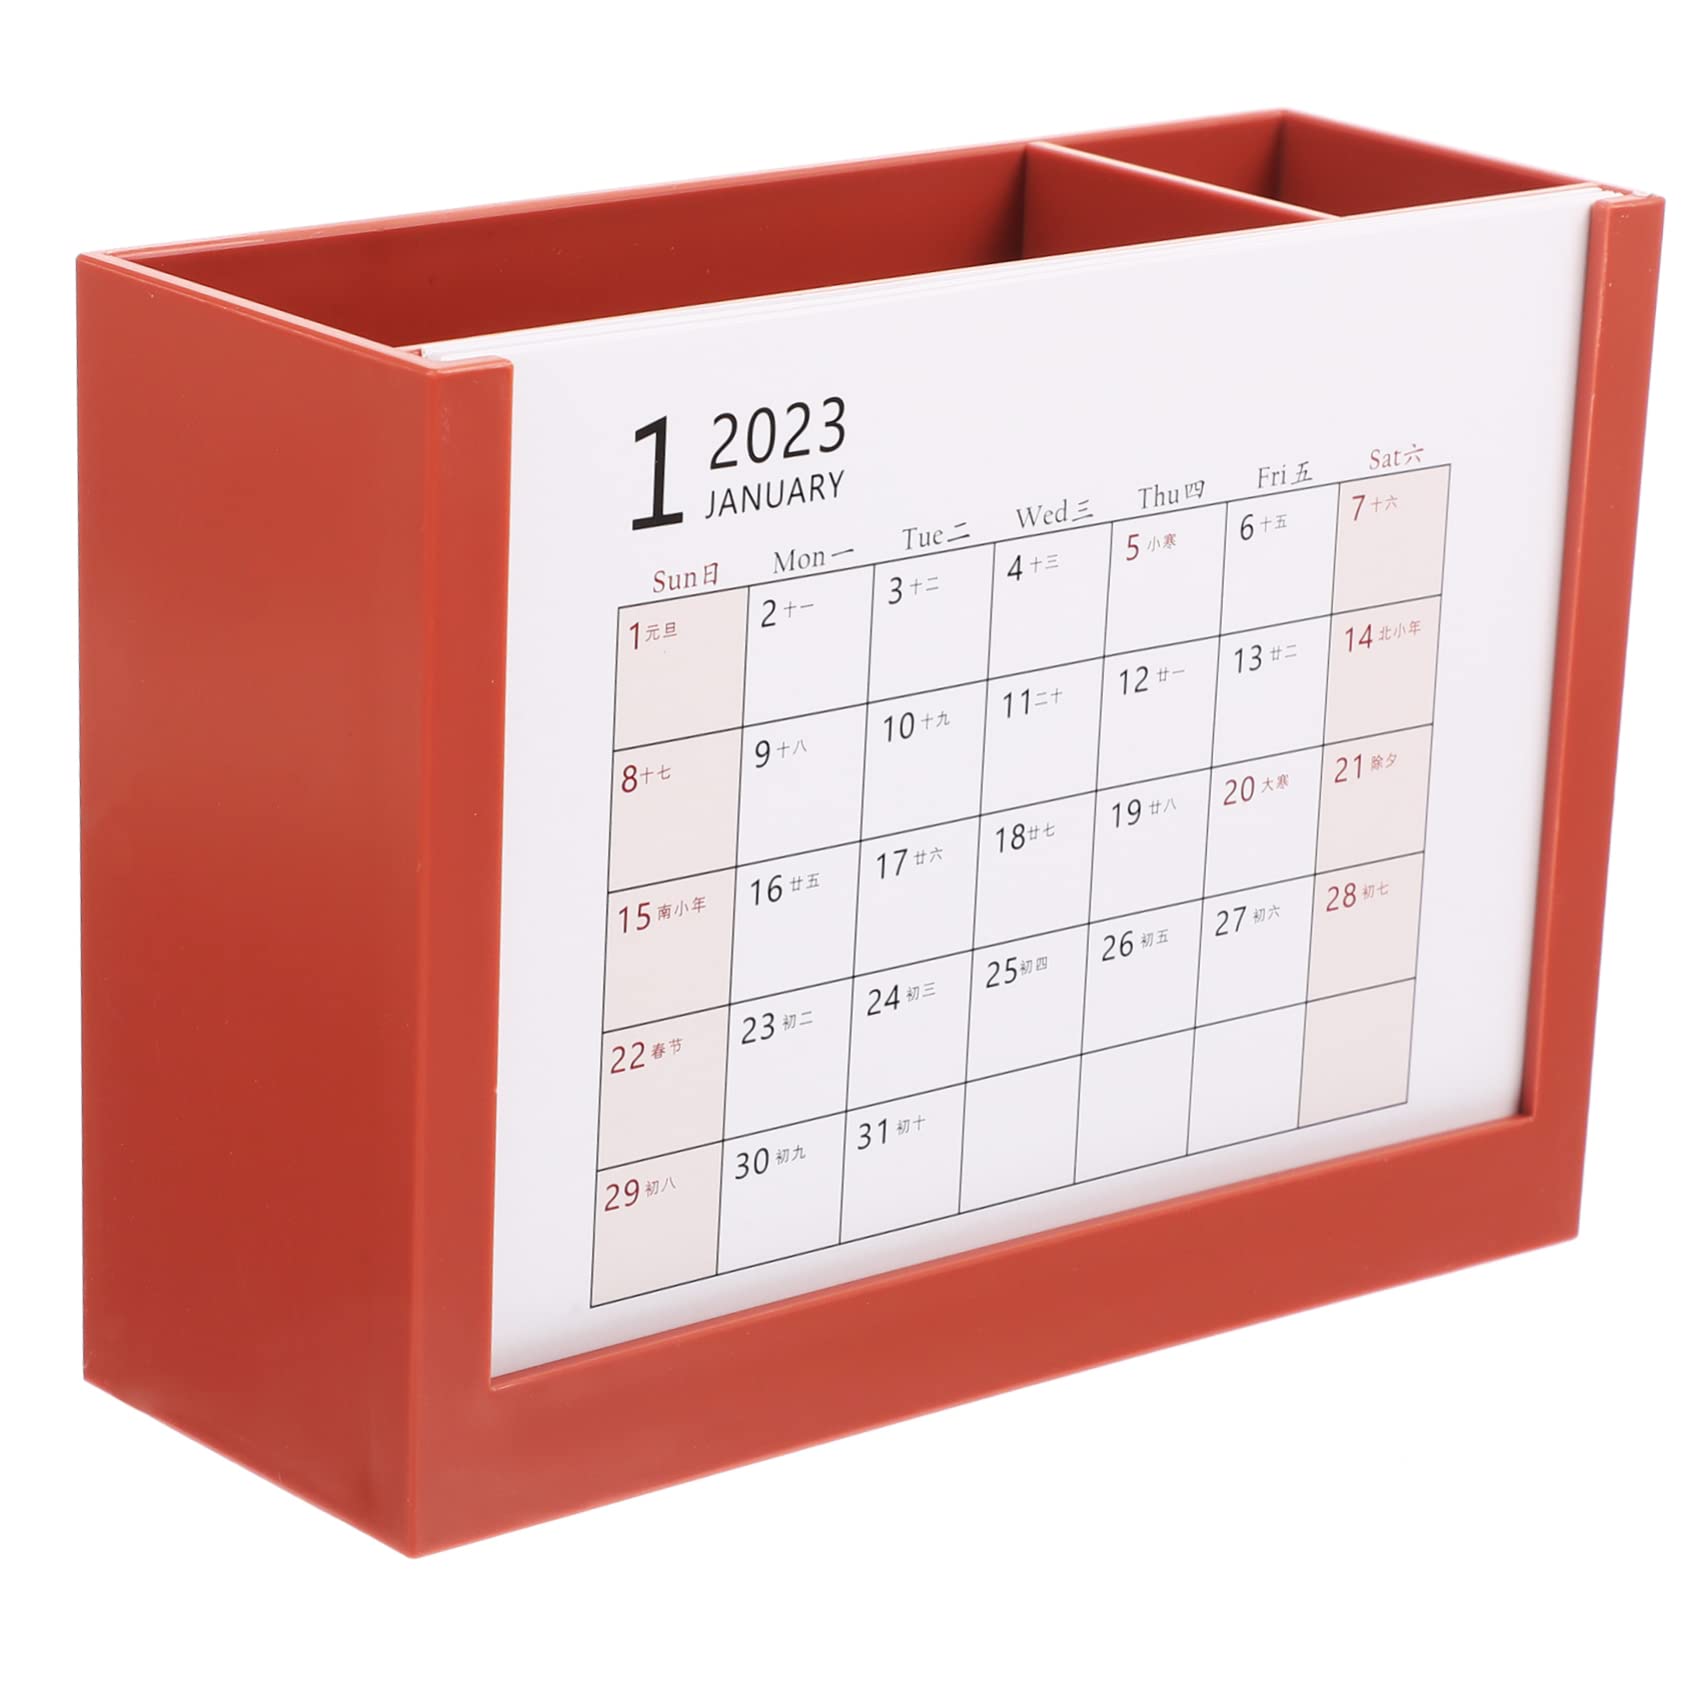 Calendar with a pen or pencil marking a date for scheduling